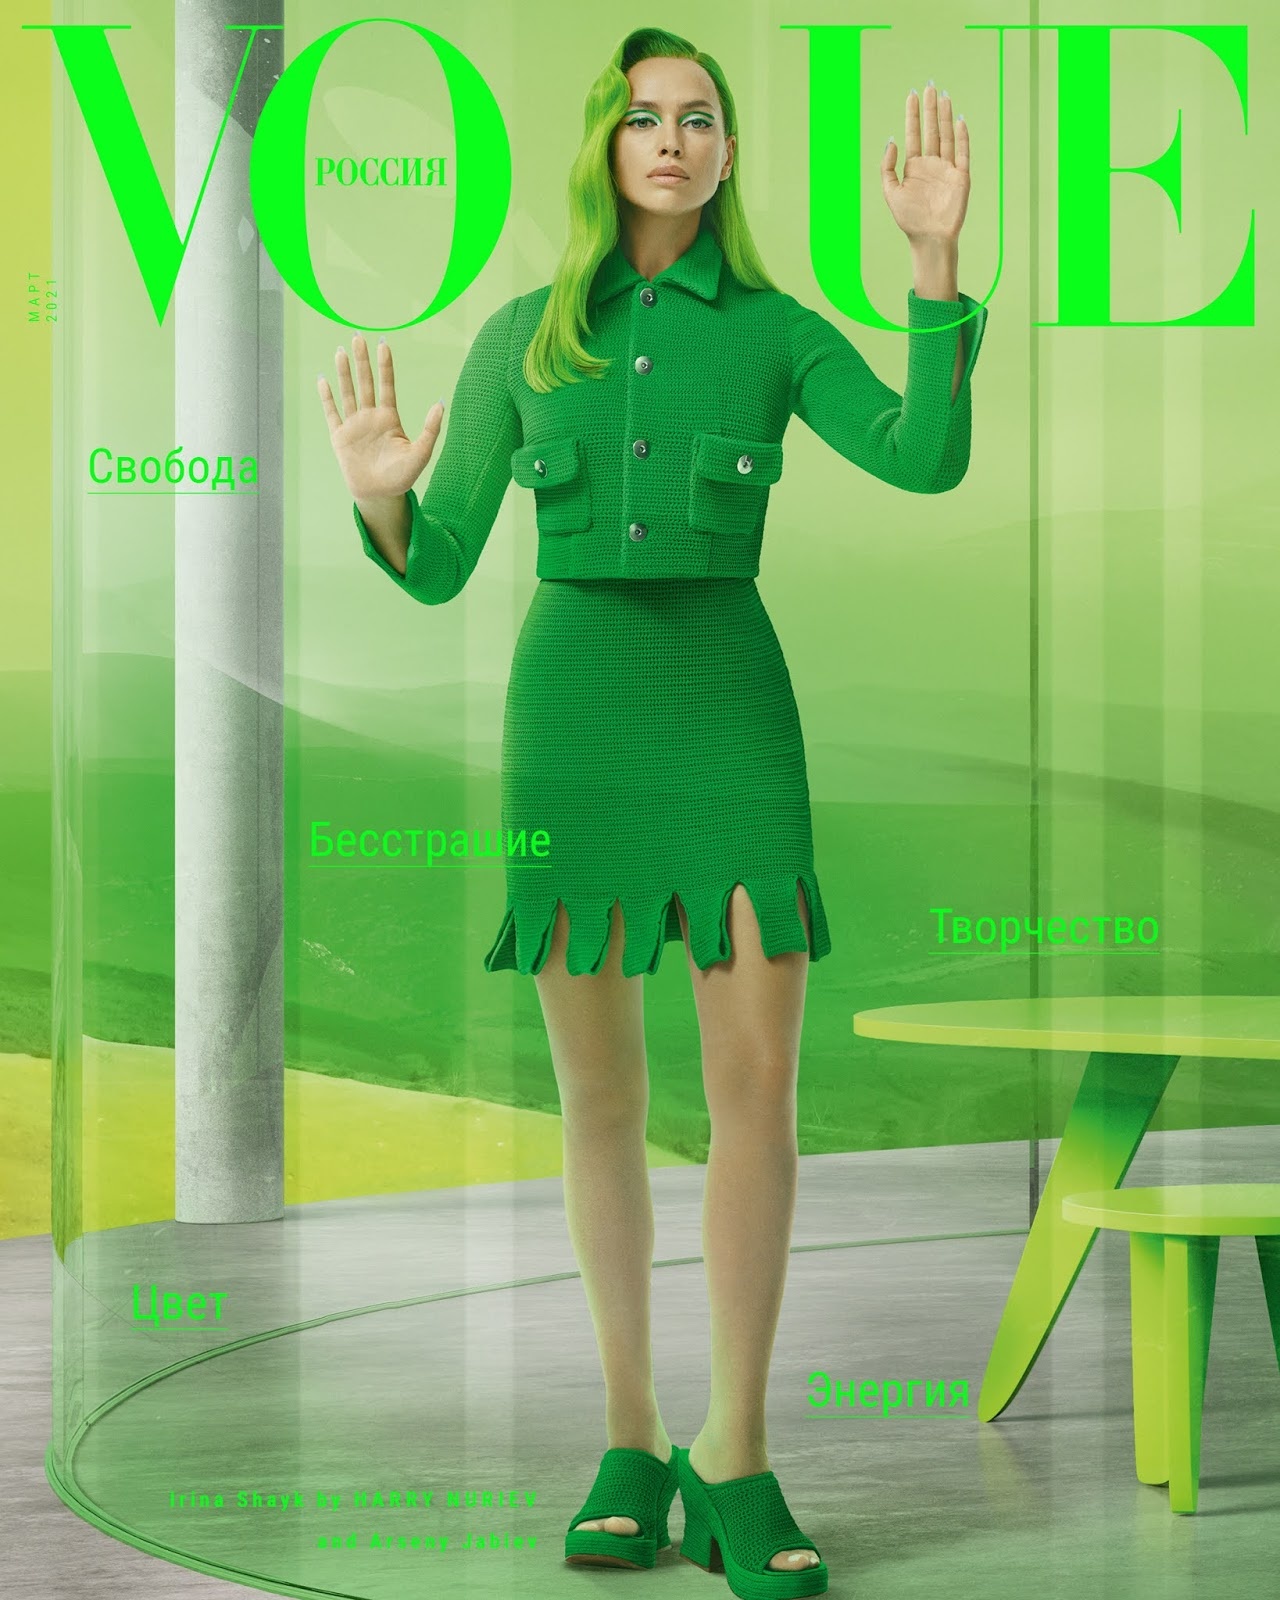 Vogue Russia March 2021 Cover Story Editorial